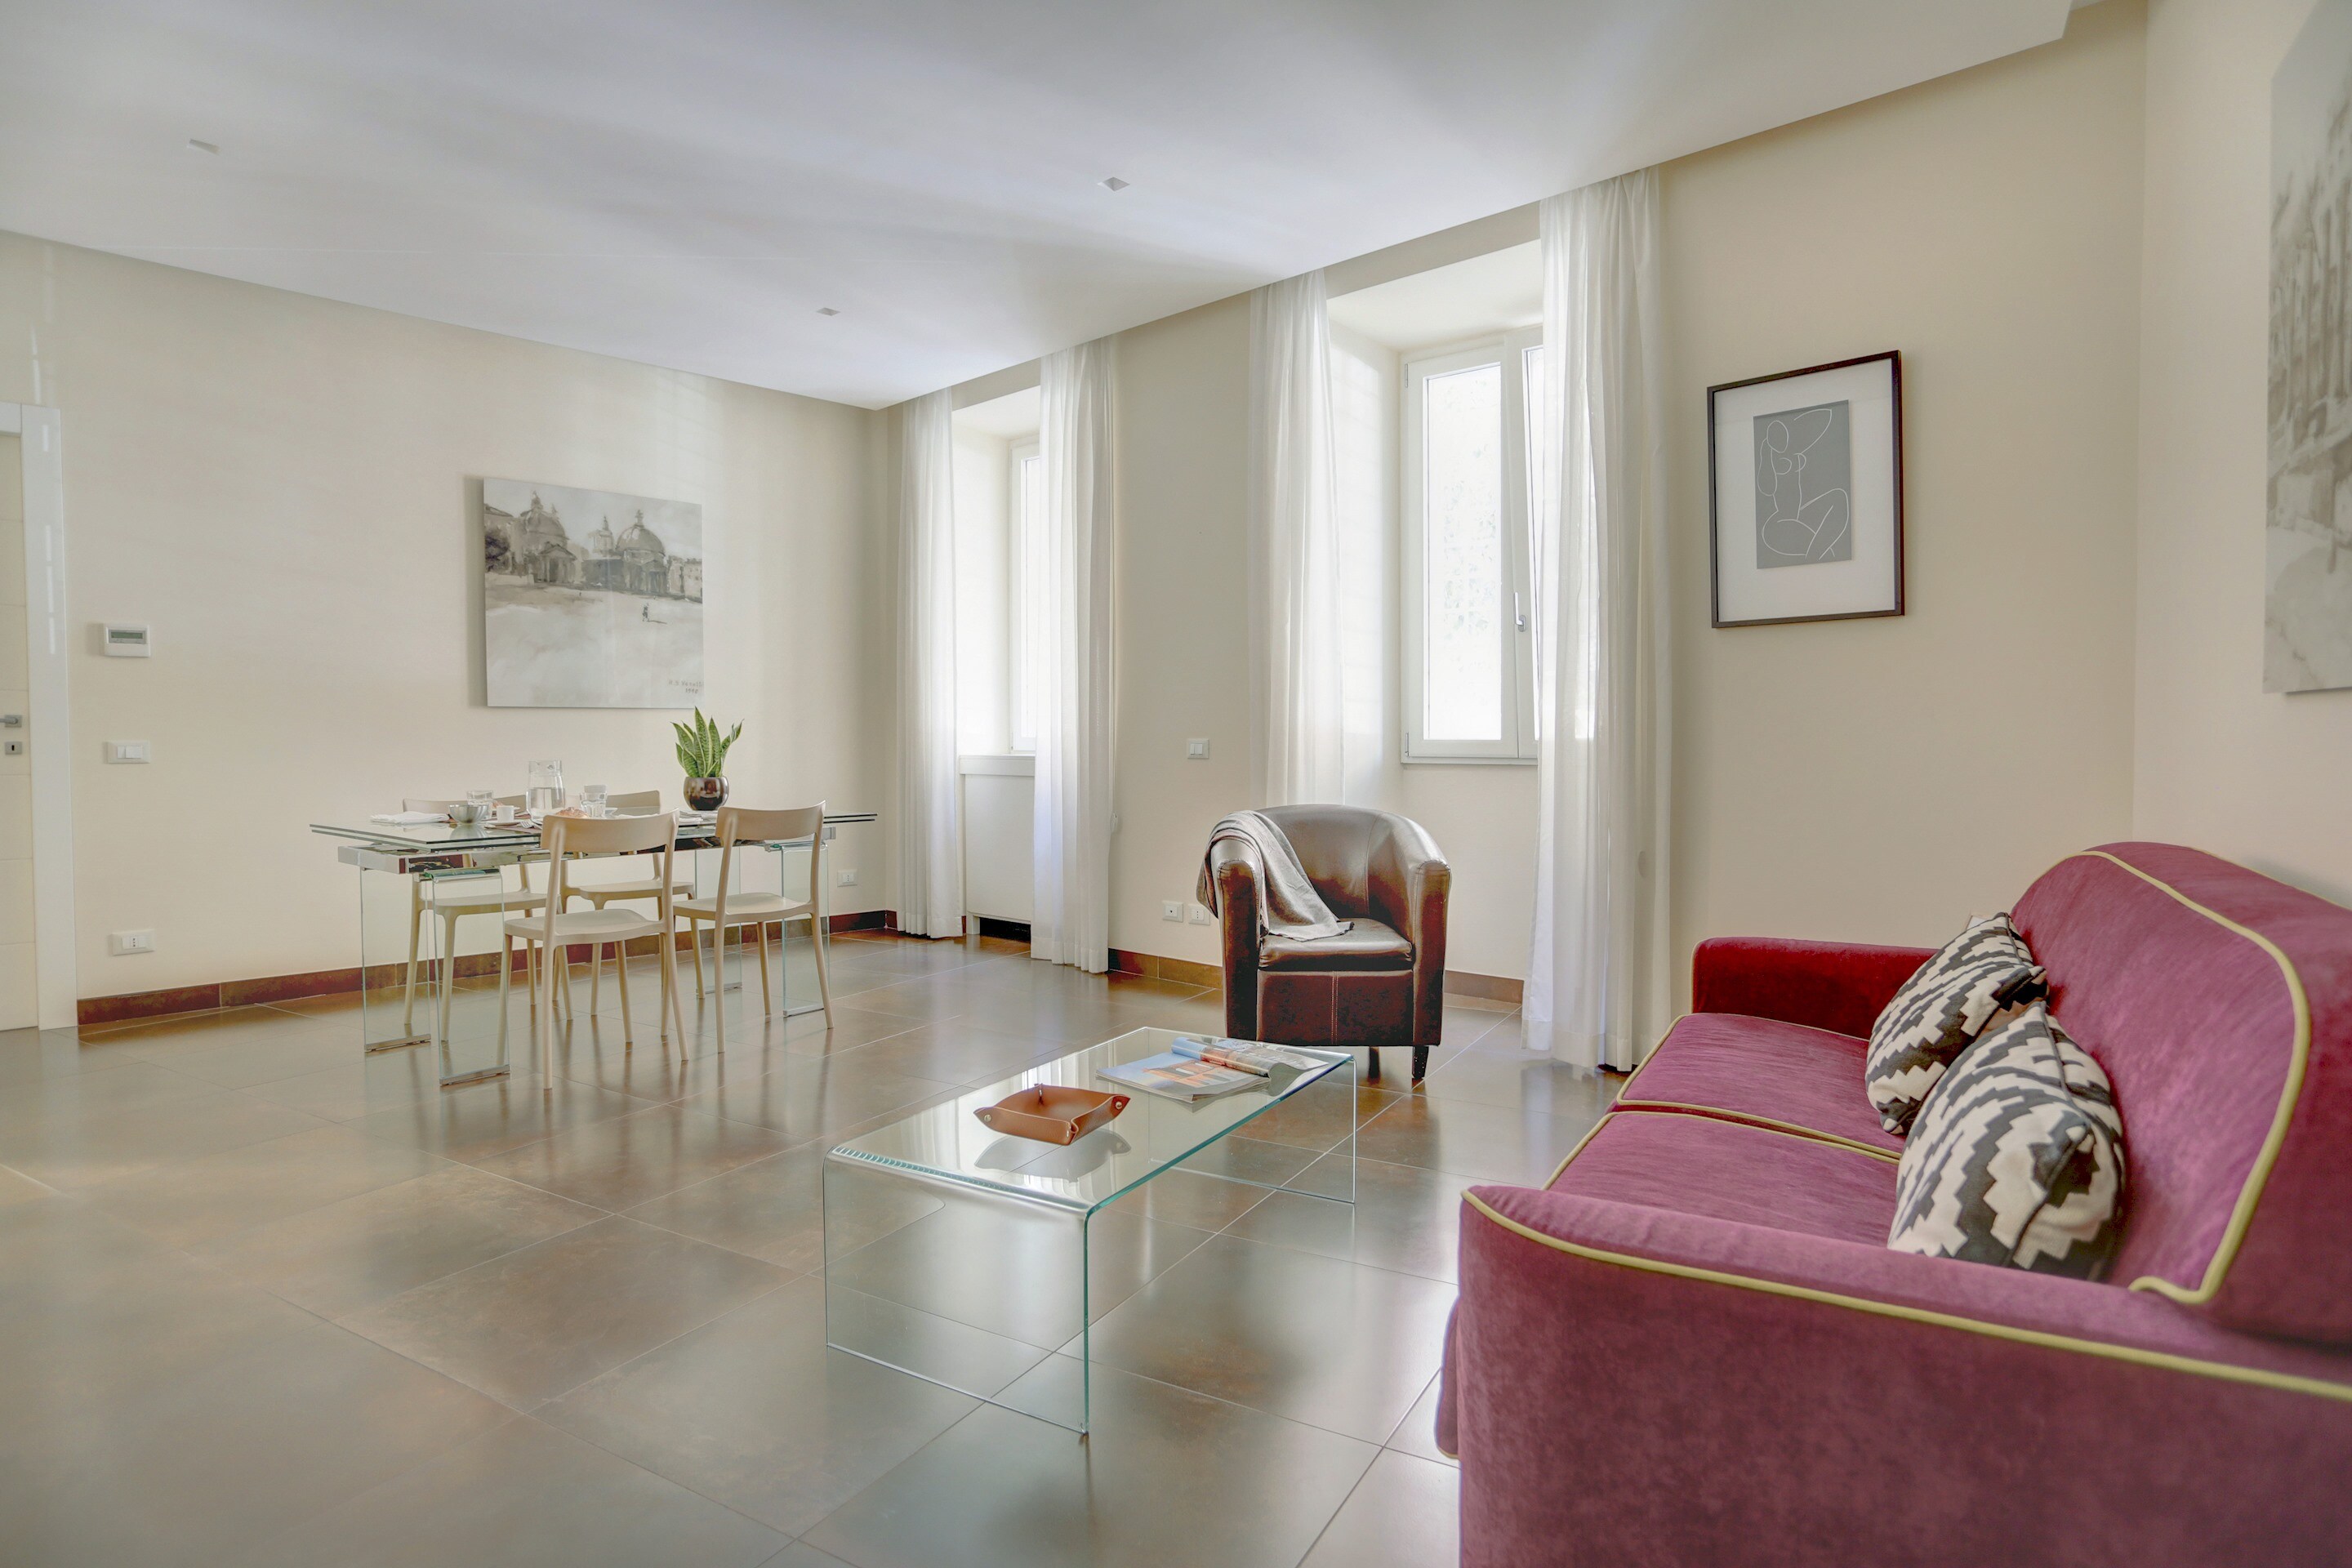 Property Image 2 - Fantastic one bedroom apartment close to Colosseo